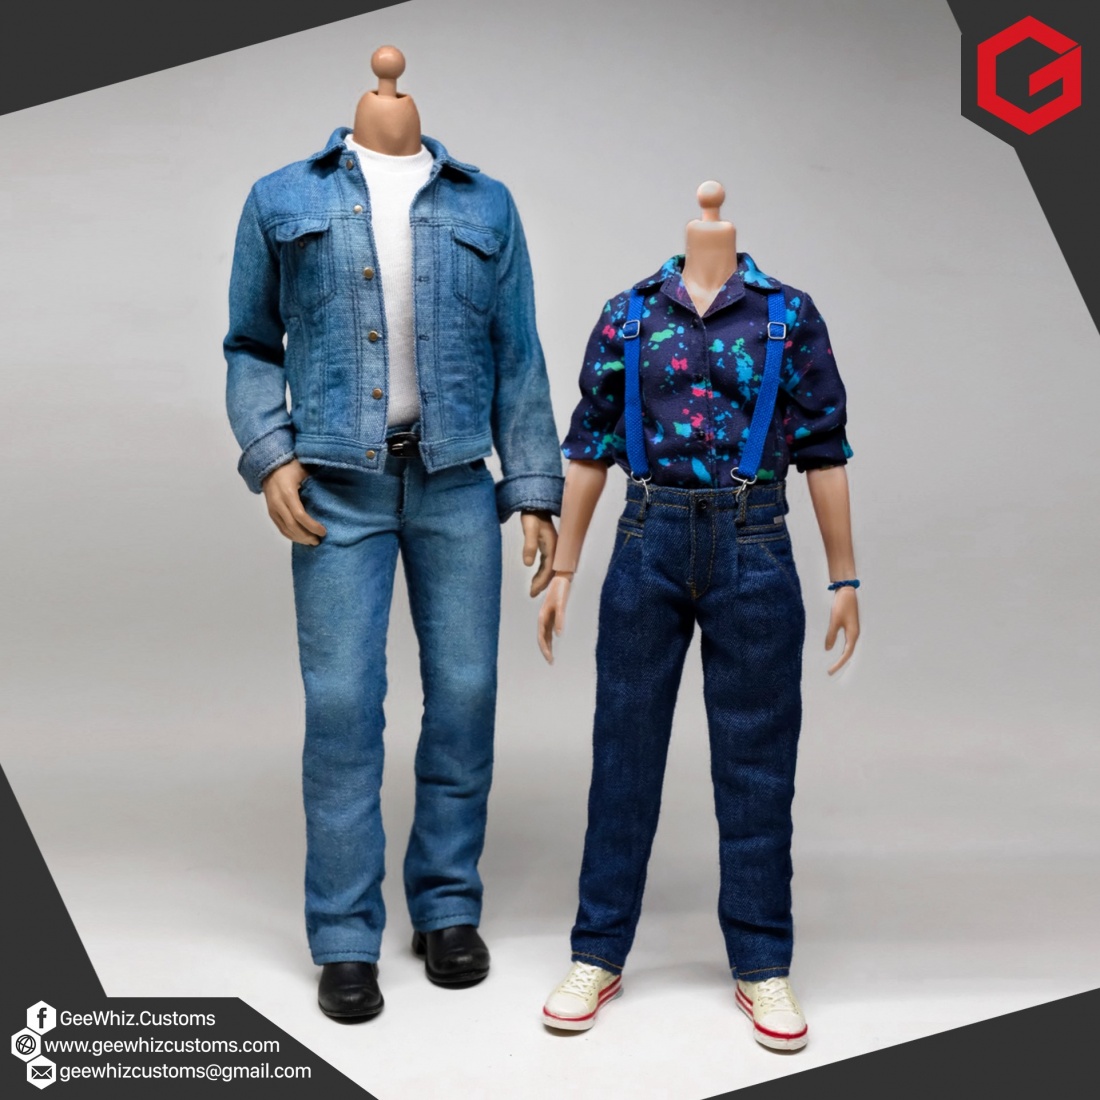 Geewhiz Customs: Eleven and Billy Hargrove Outfits (Stranger Things)